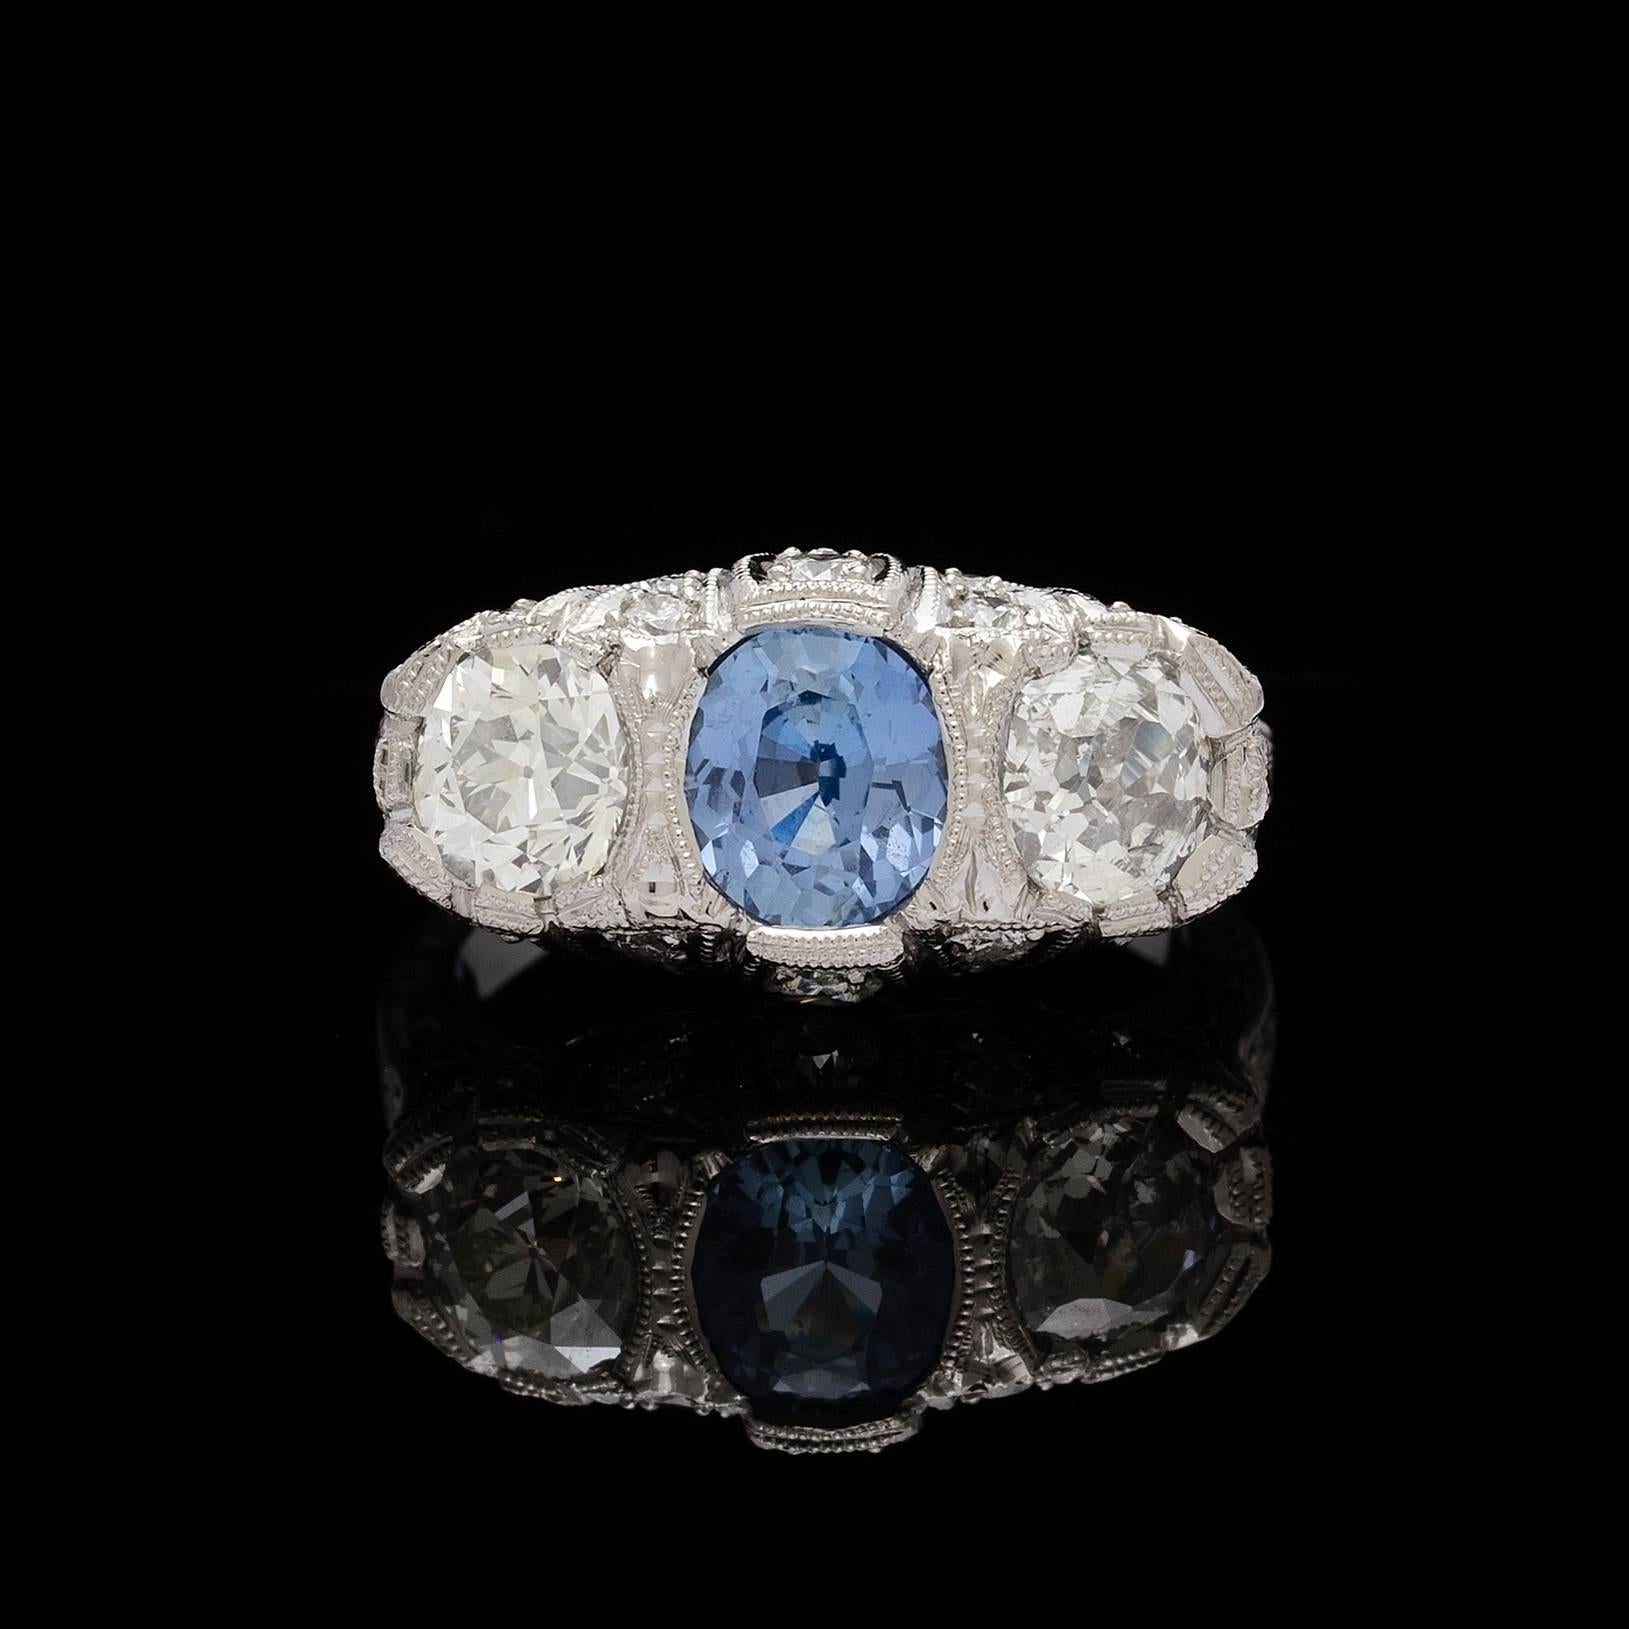 Platinum 3-stone filigree ring features a center GIA 1.30 carat oval cut unheated sapphire. The color is described as violetish blue, report # 1106710481 accompanies the sapphire. Set on each side of the sapphire are old european cut diamonds